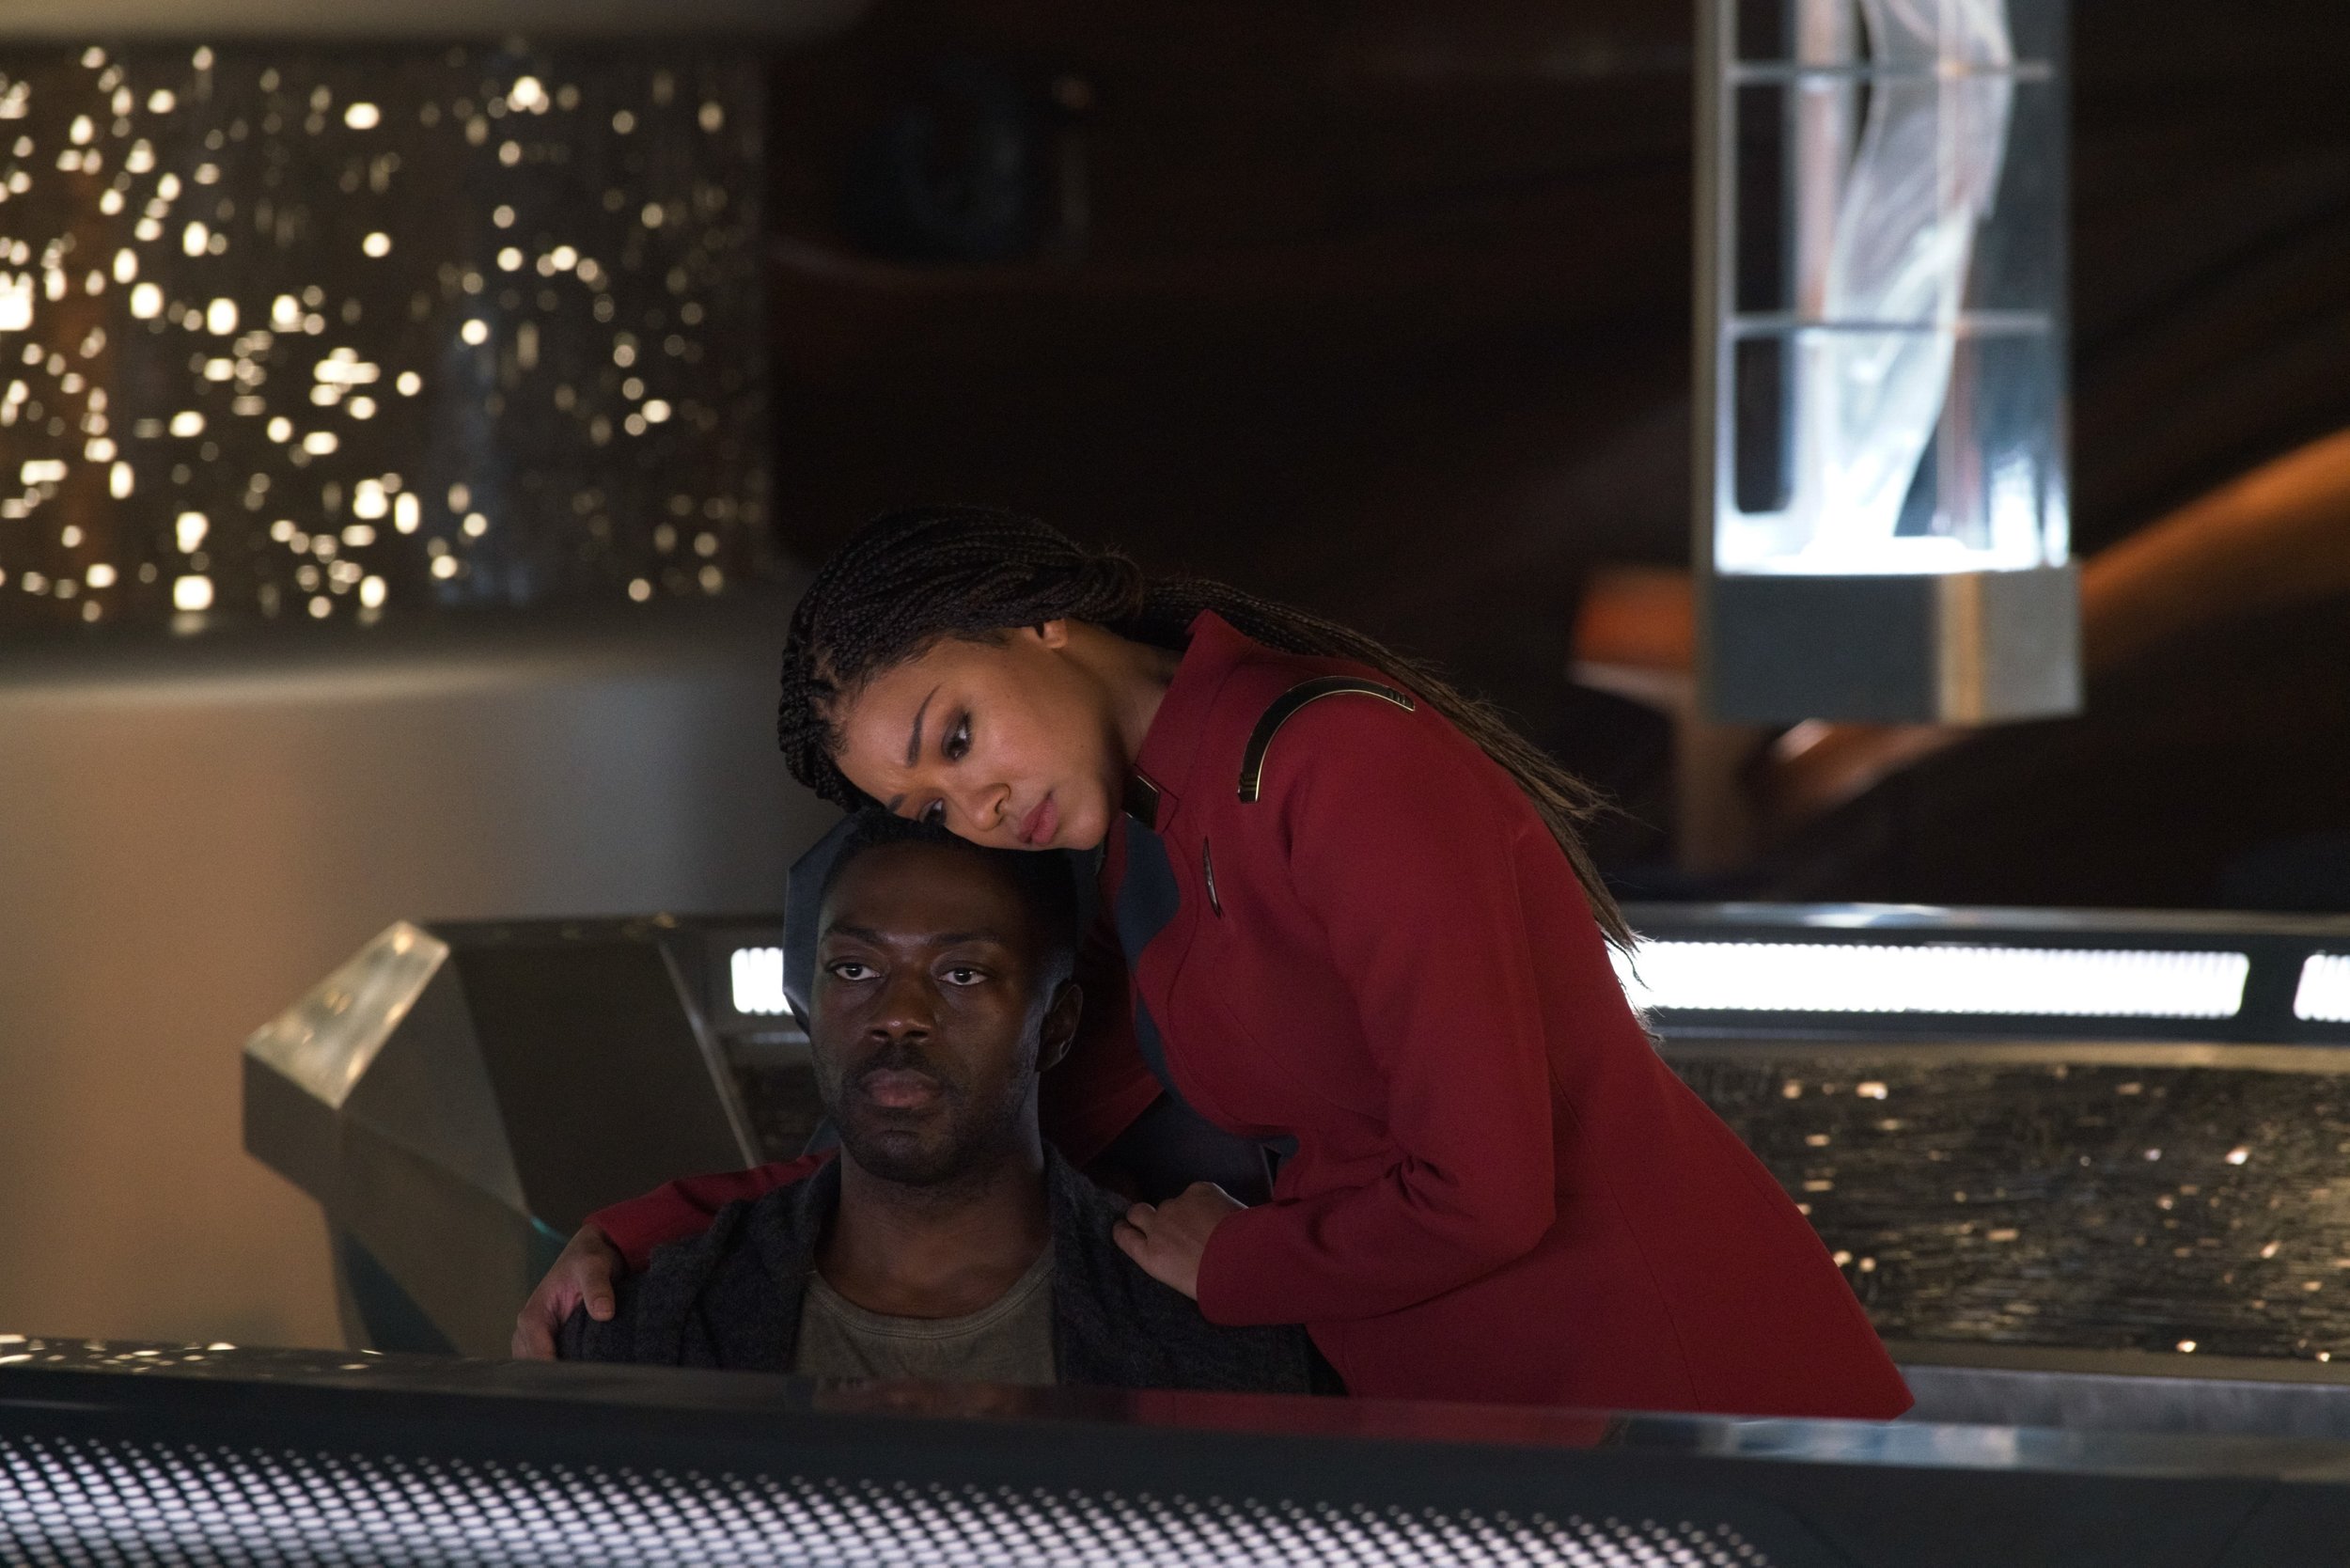   Pictured: David Ajala as Book and Sonequa Martin-Green as Burnham of the Paramount+ original series STAR TREK: DISCOVERY. Photo Cr: Michael Gibson/ViacomCBS © 2021 ViacomCBS. All Rights Reserved.  